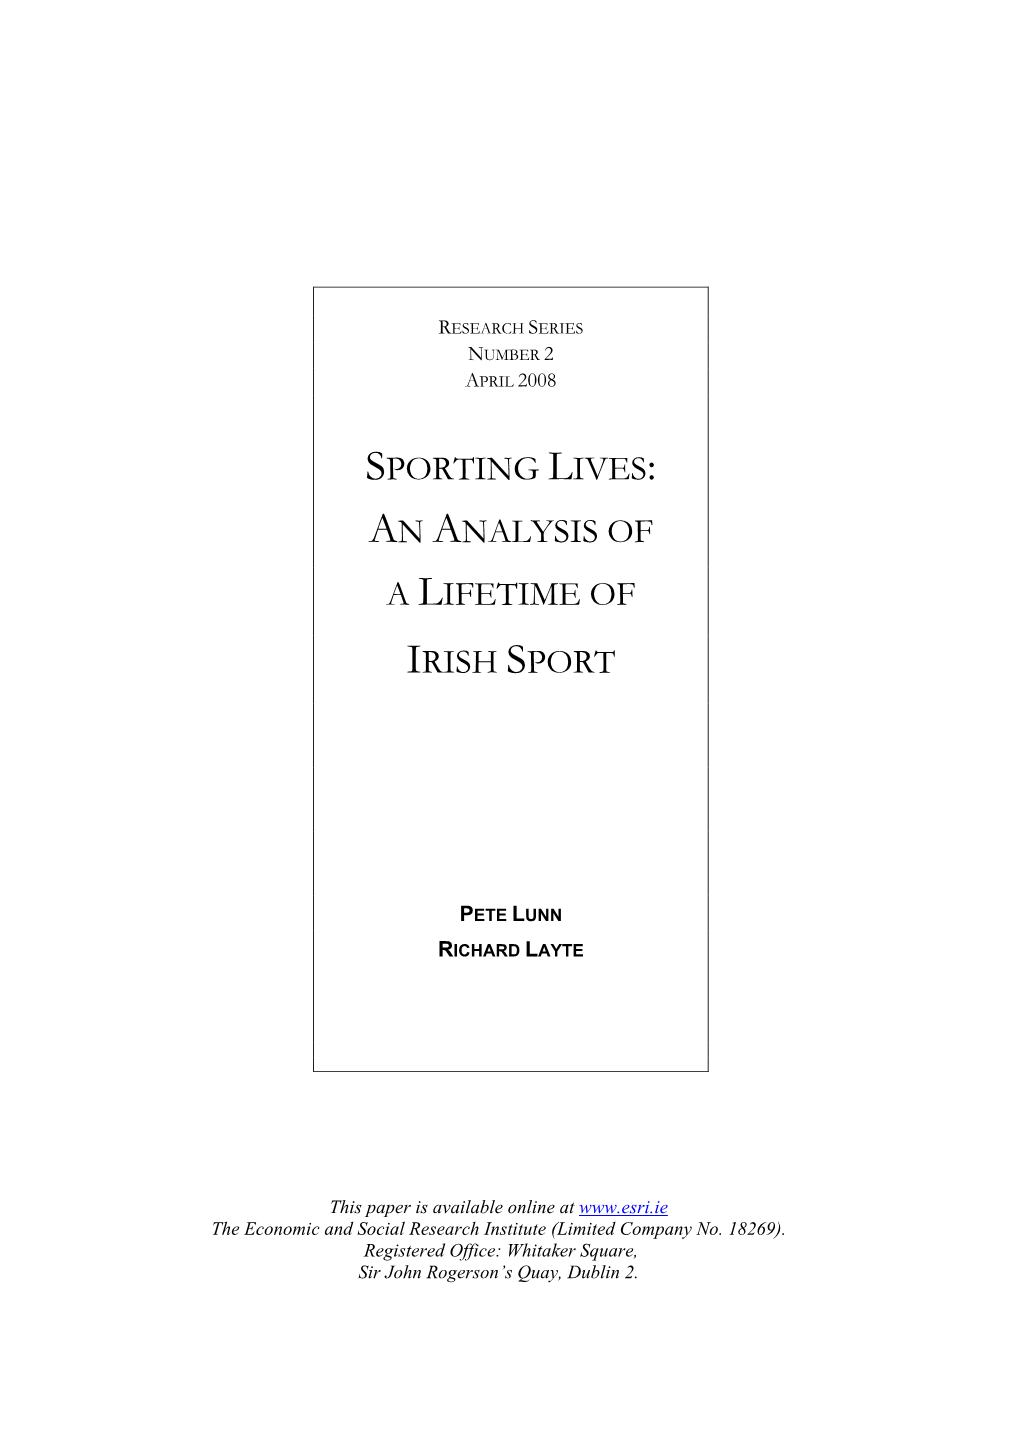 Sporting Lives: an Analysis of a Lifetime of Irish Sport